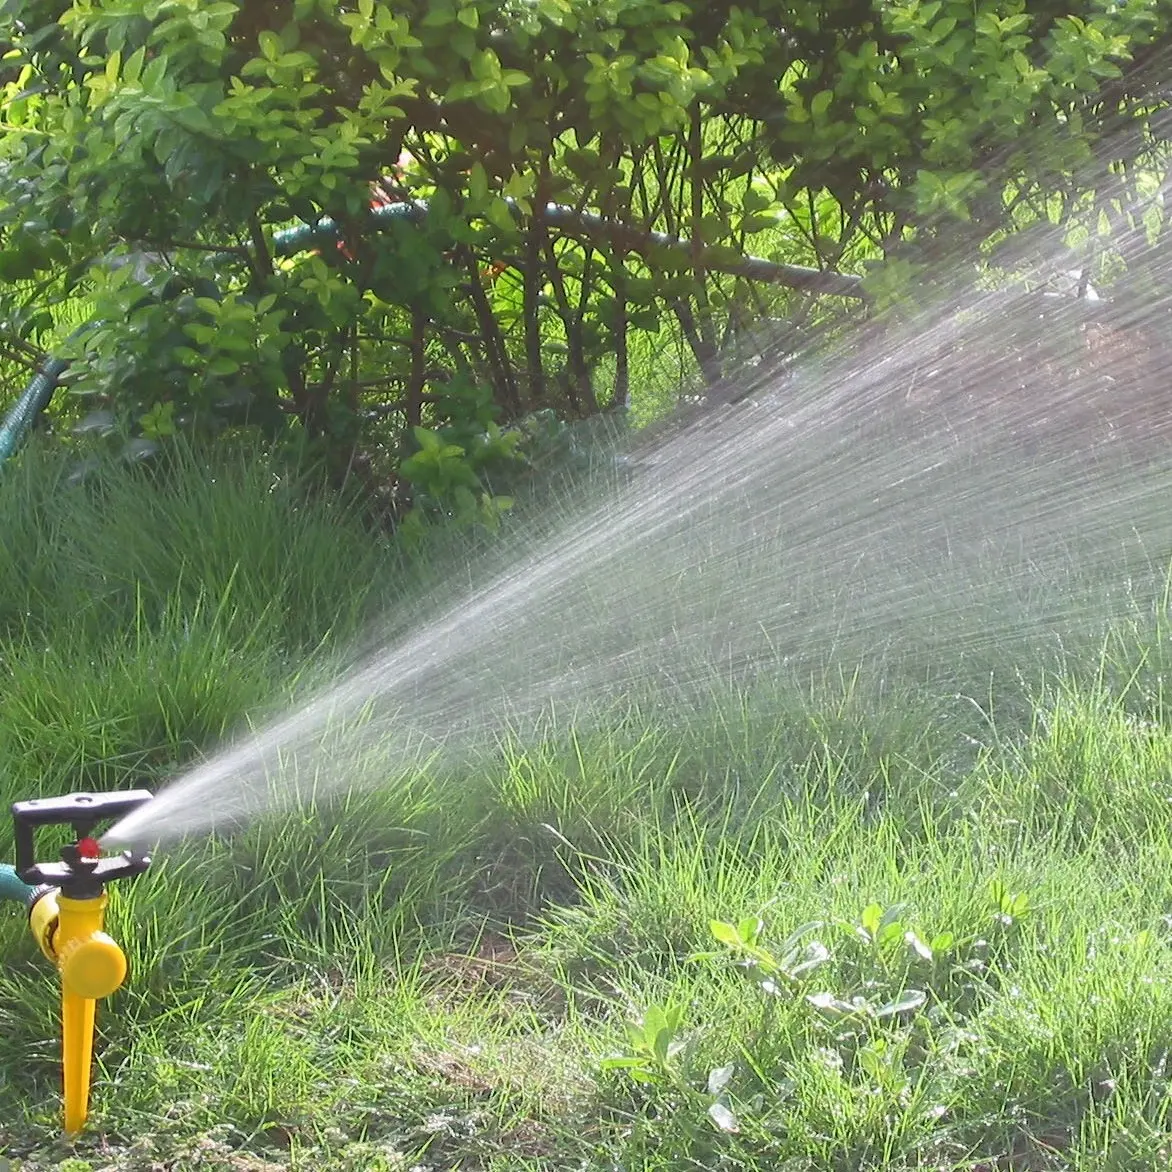 Damping 360 degrees rotation Variable angle irrigation automatic sprinkler other watering